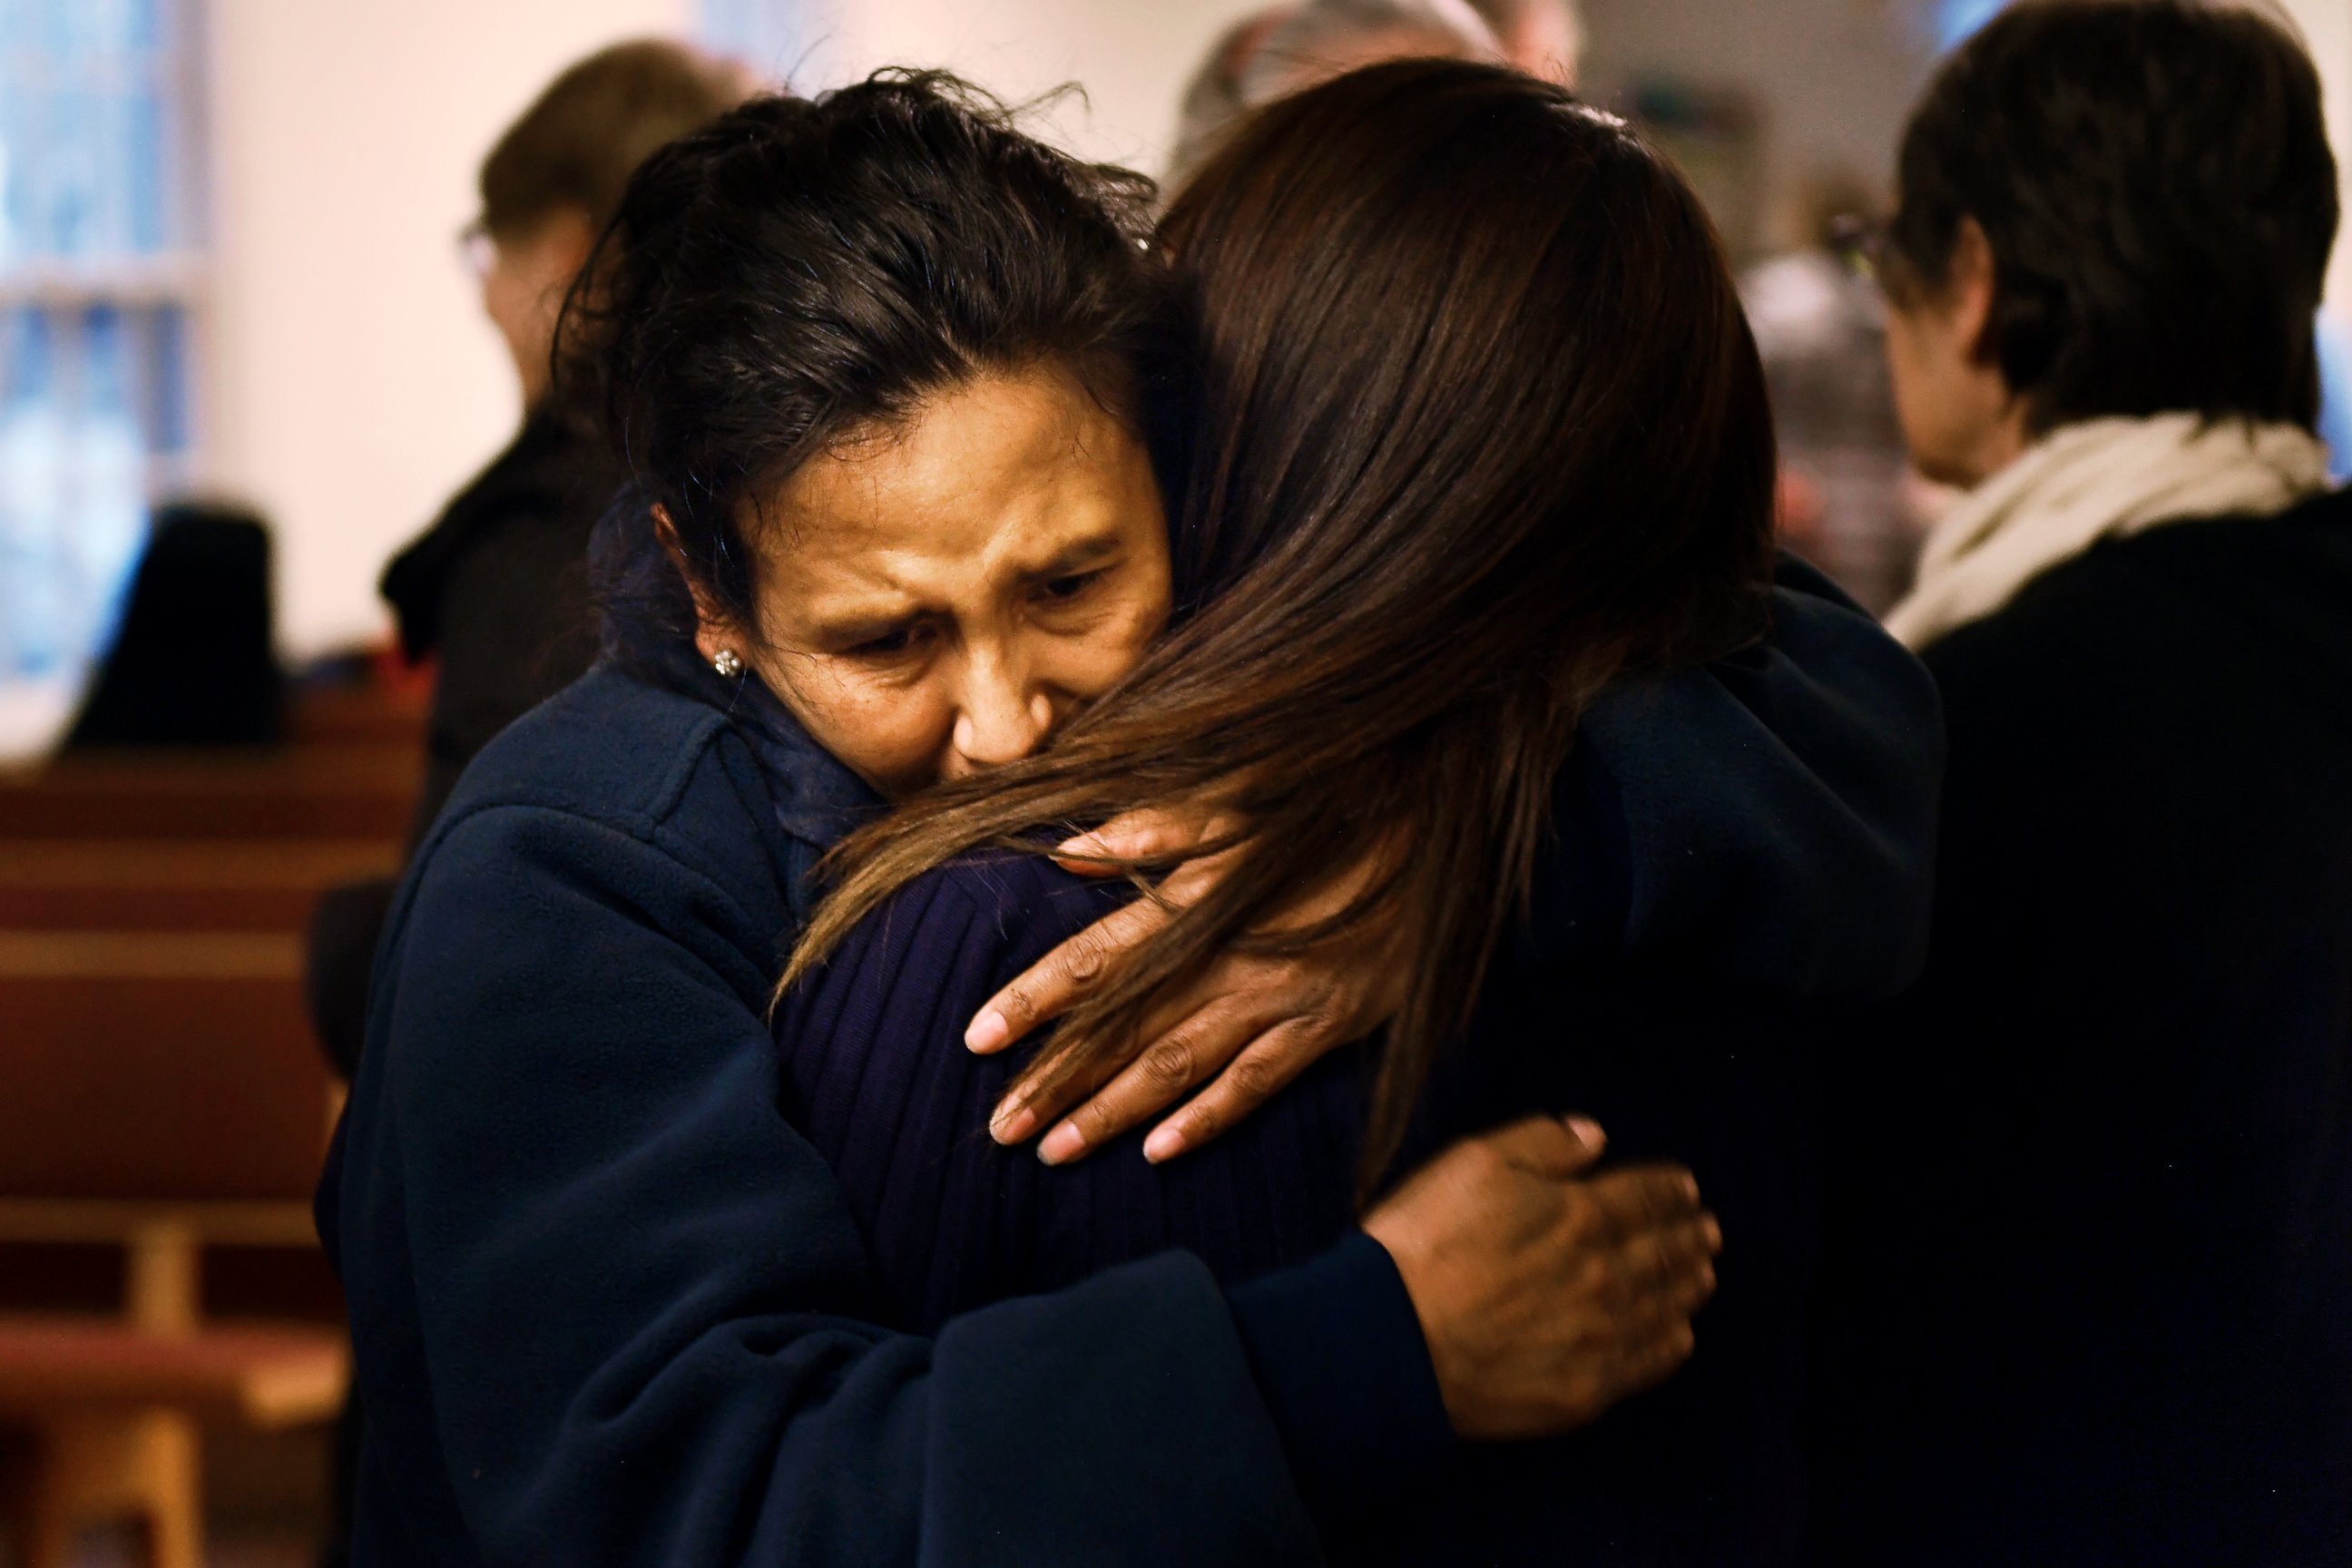 PHOTO: Jeanette Vizguerra hugs her friend Ingrid Encalada Latorre after Latorre announces her claim of Sanctuary at a Mountain View Friends Meeting.